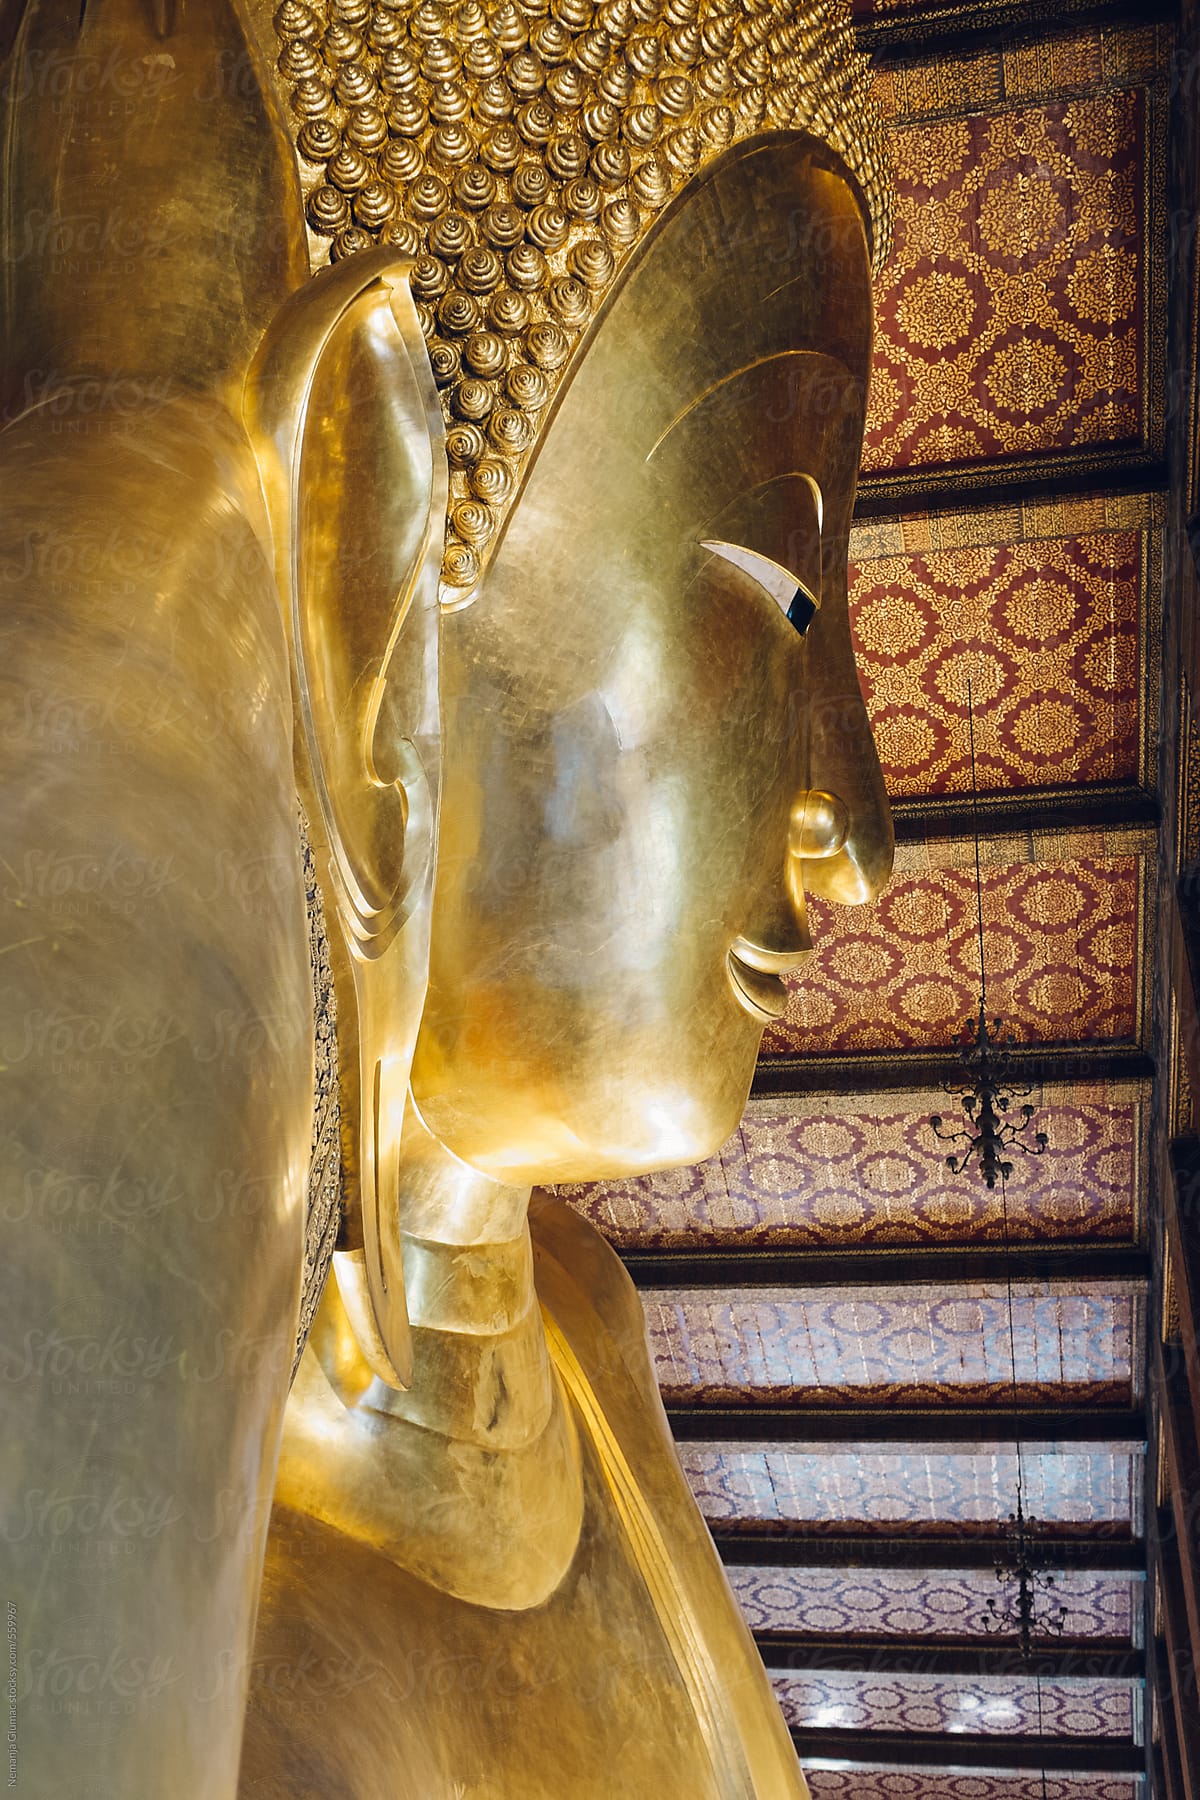 Sculpture of Reclining Buddha in Wat Pho Temple